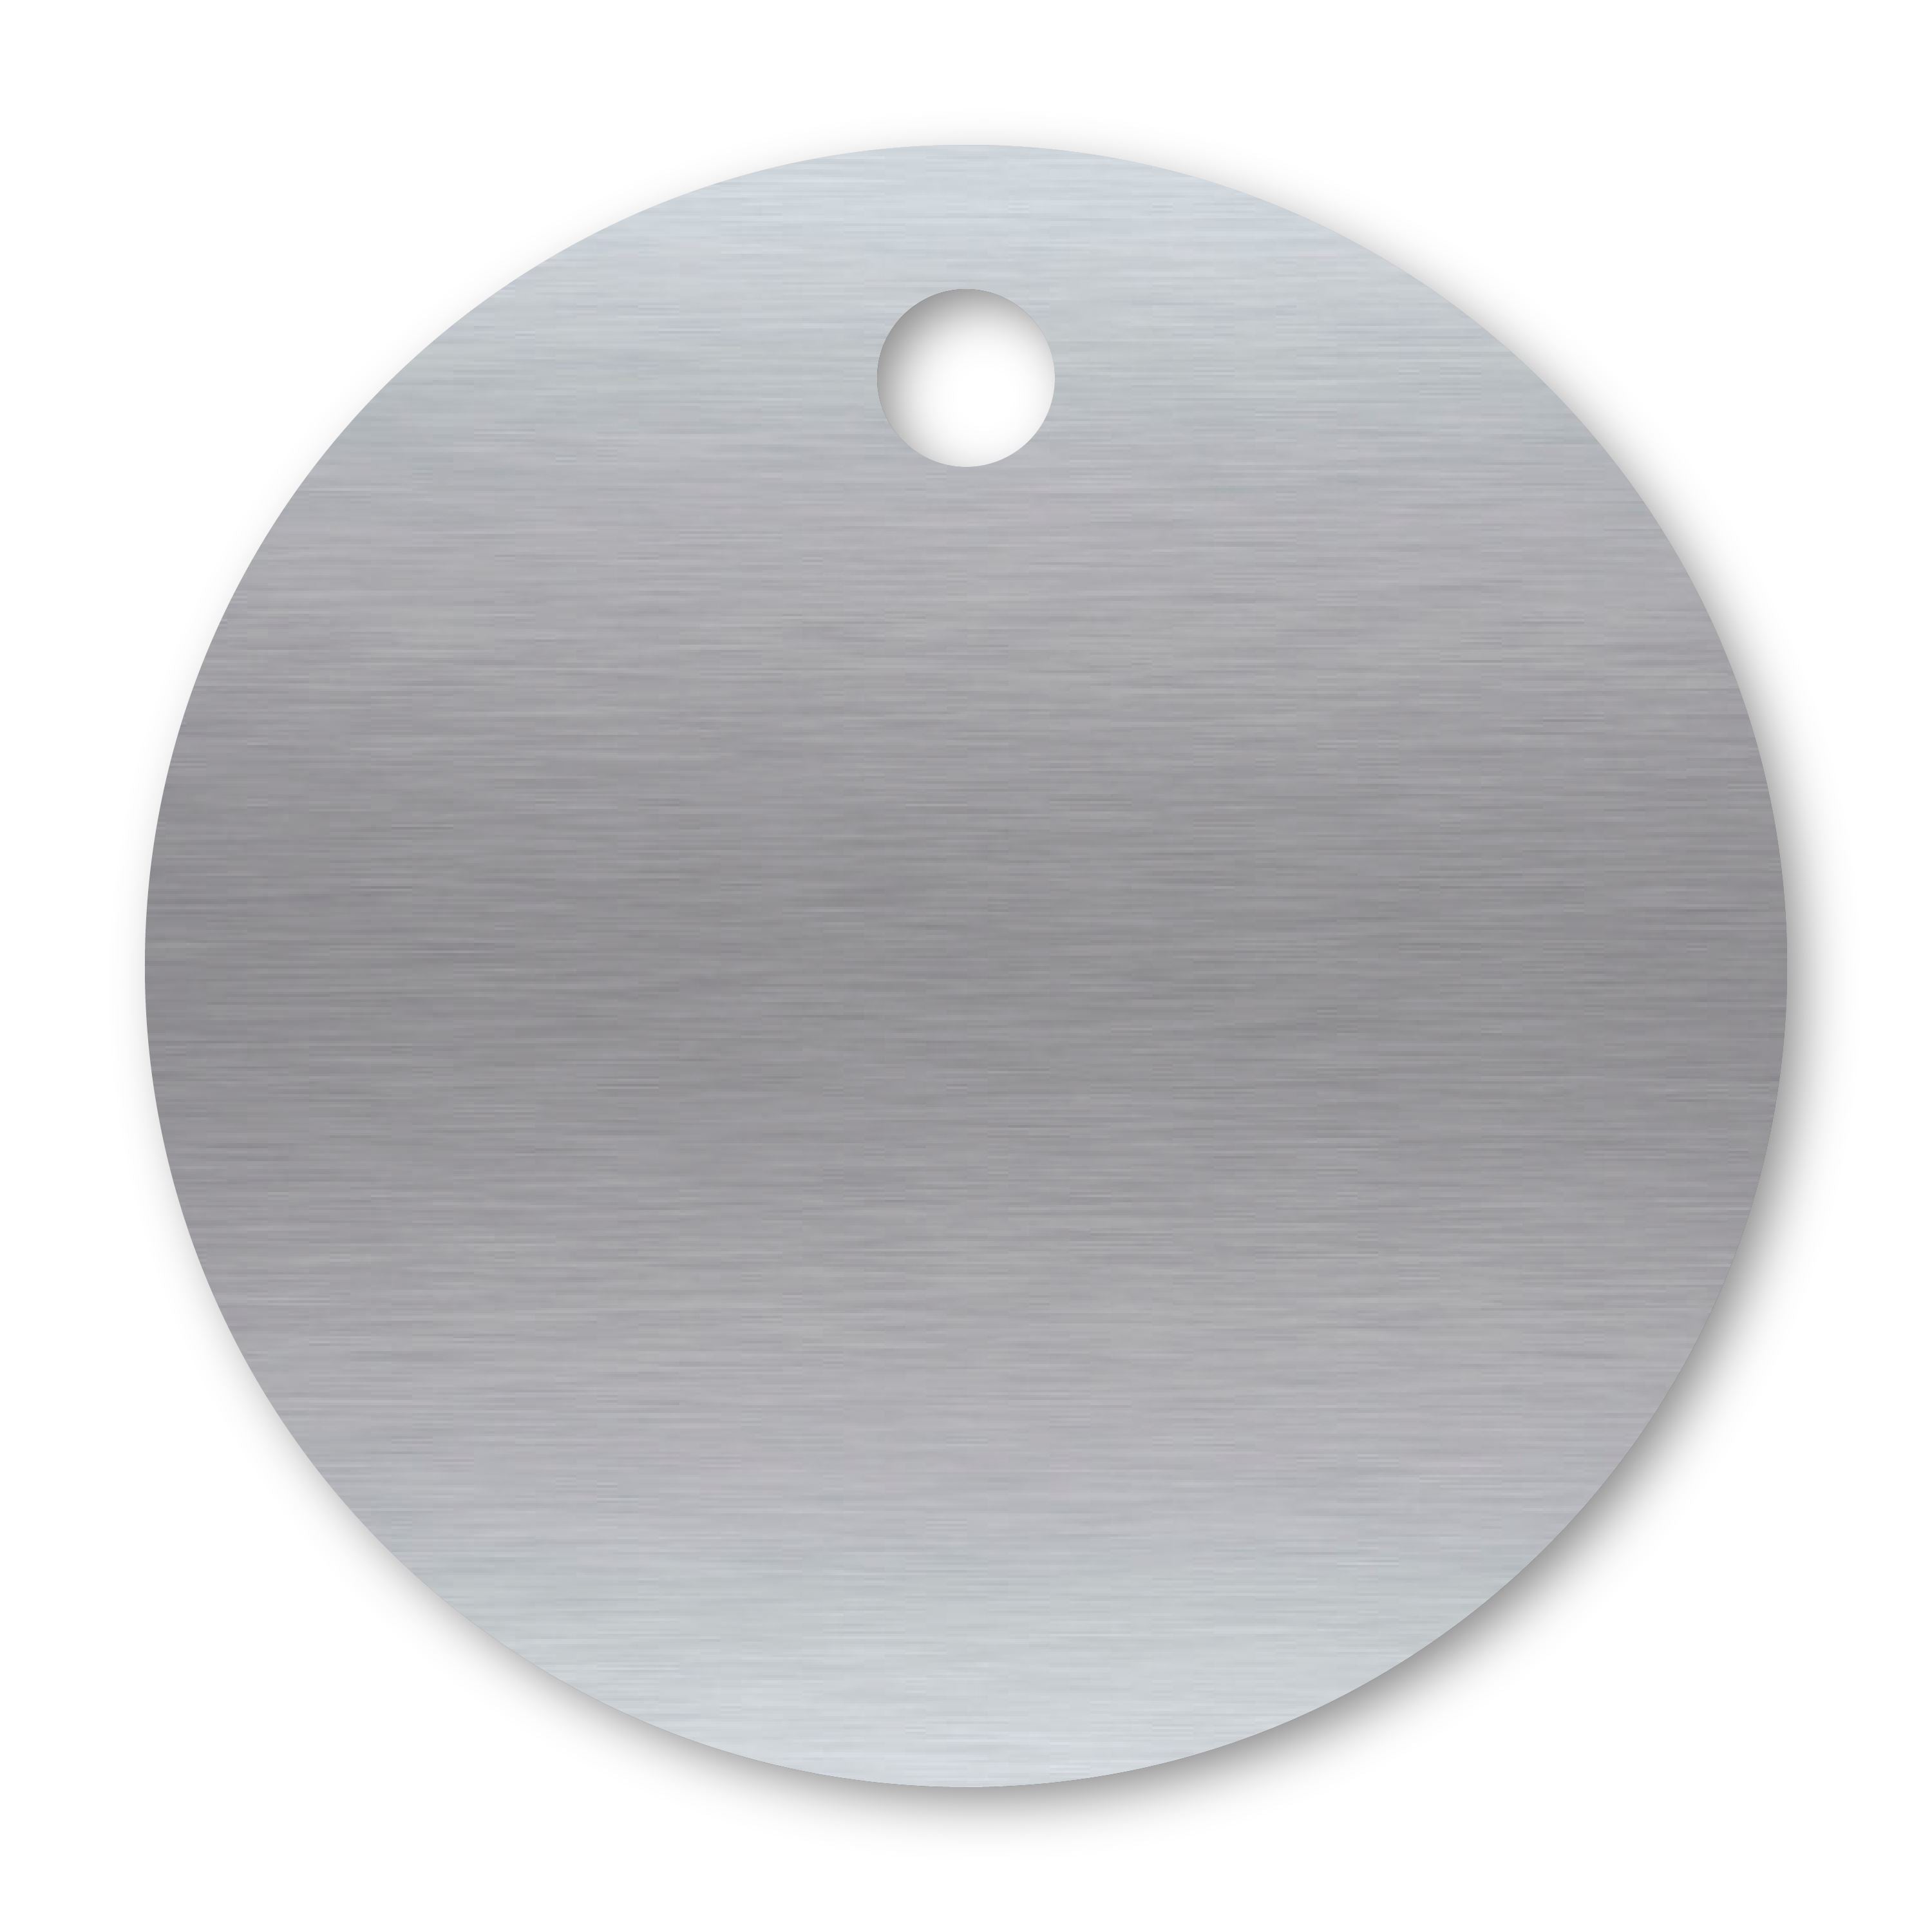 Anodized Aluminum Round Tags, 1-1/8" with 1/8" Hole, Laser Engraved Metal Tags Craftworks NW Silver 